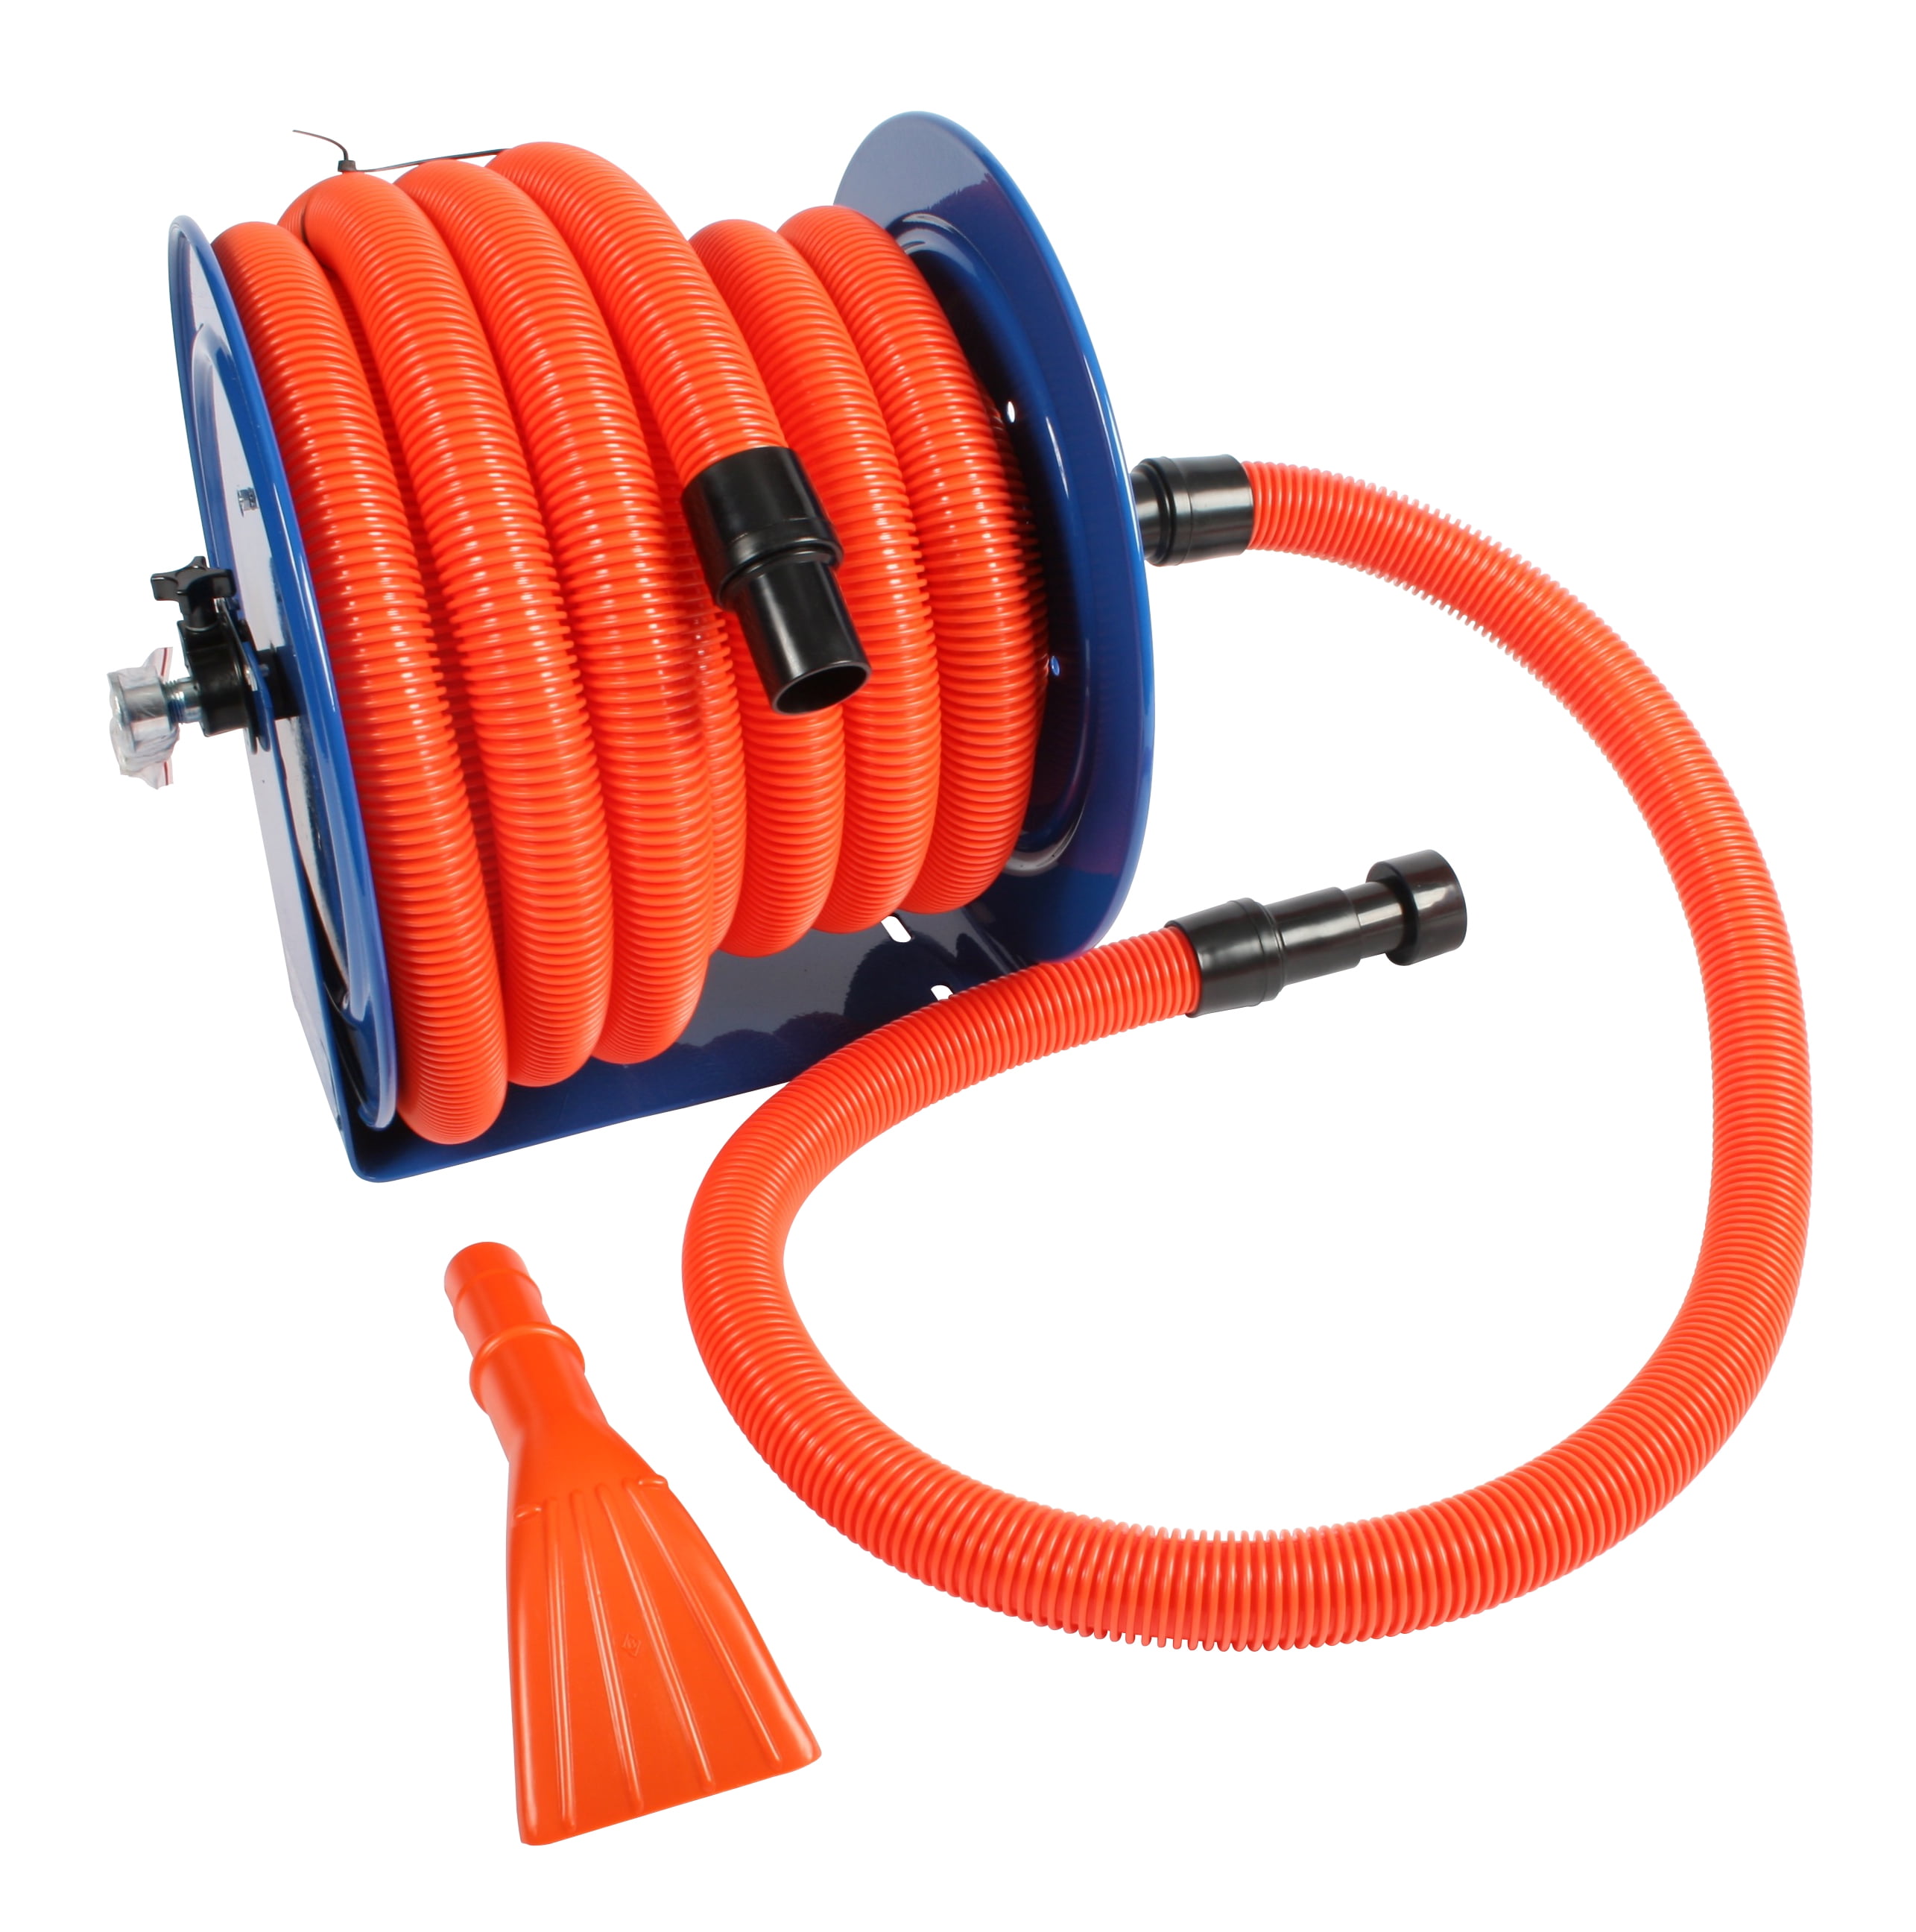 Cen-Tec Systems Industrial Hose Reel and 50 ft. Hose for Shop Vacuums